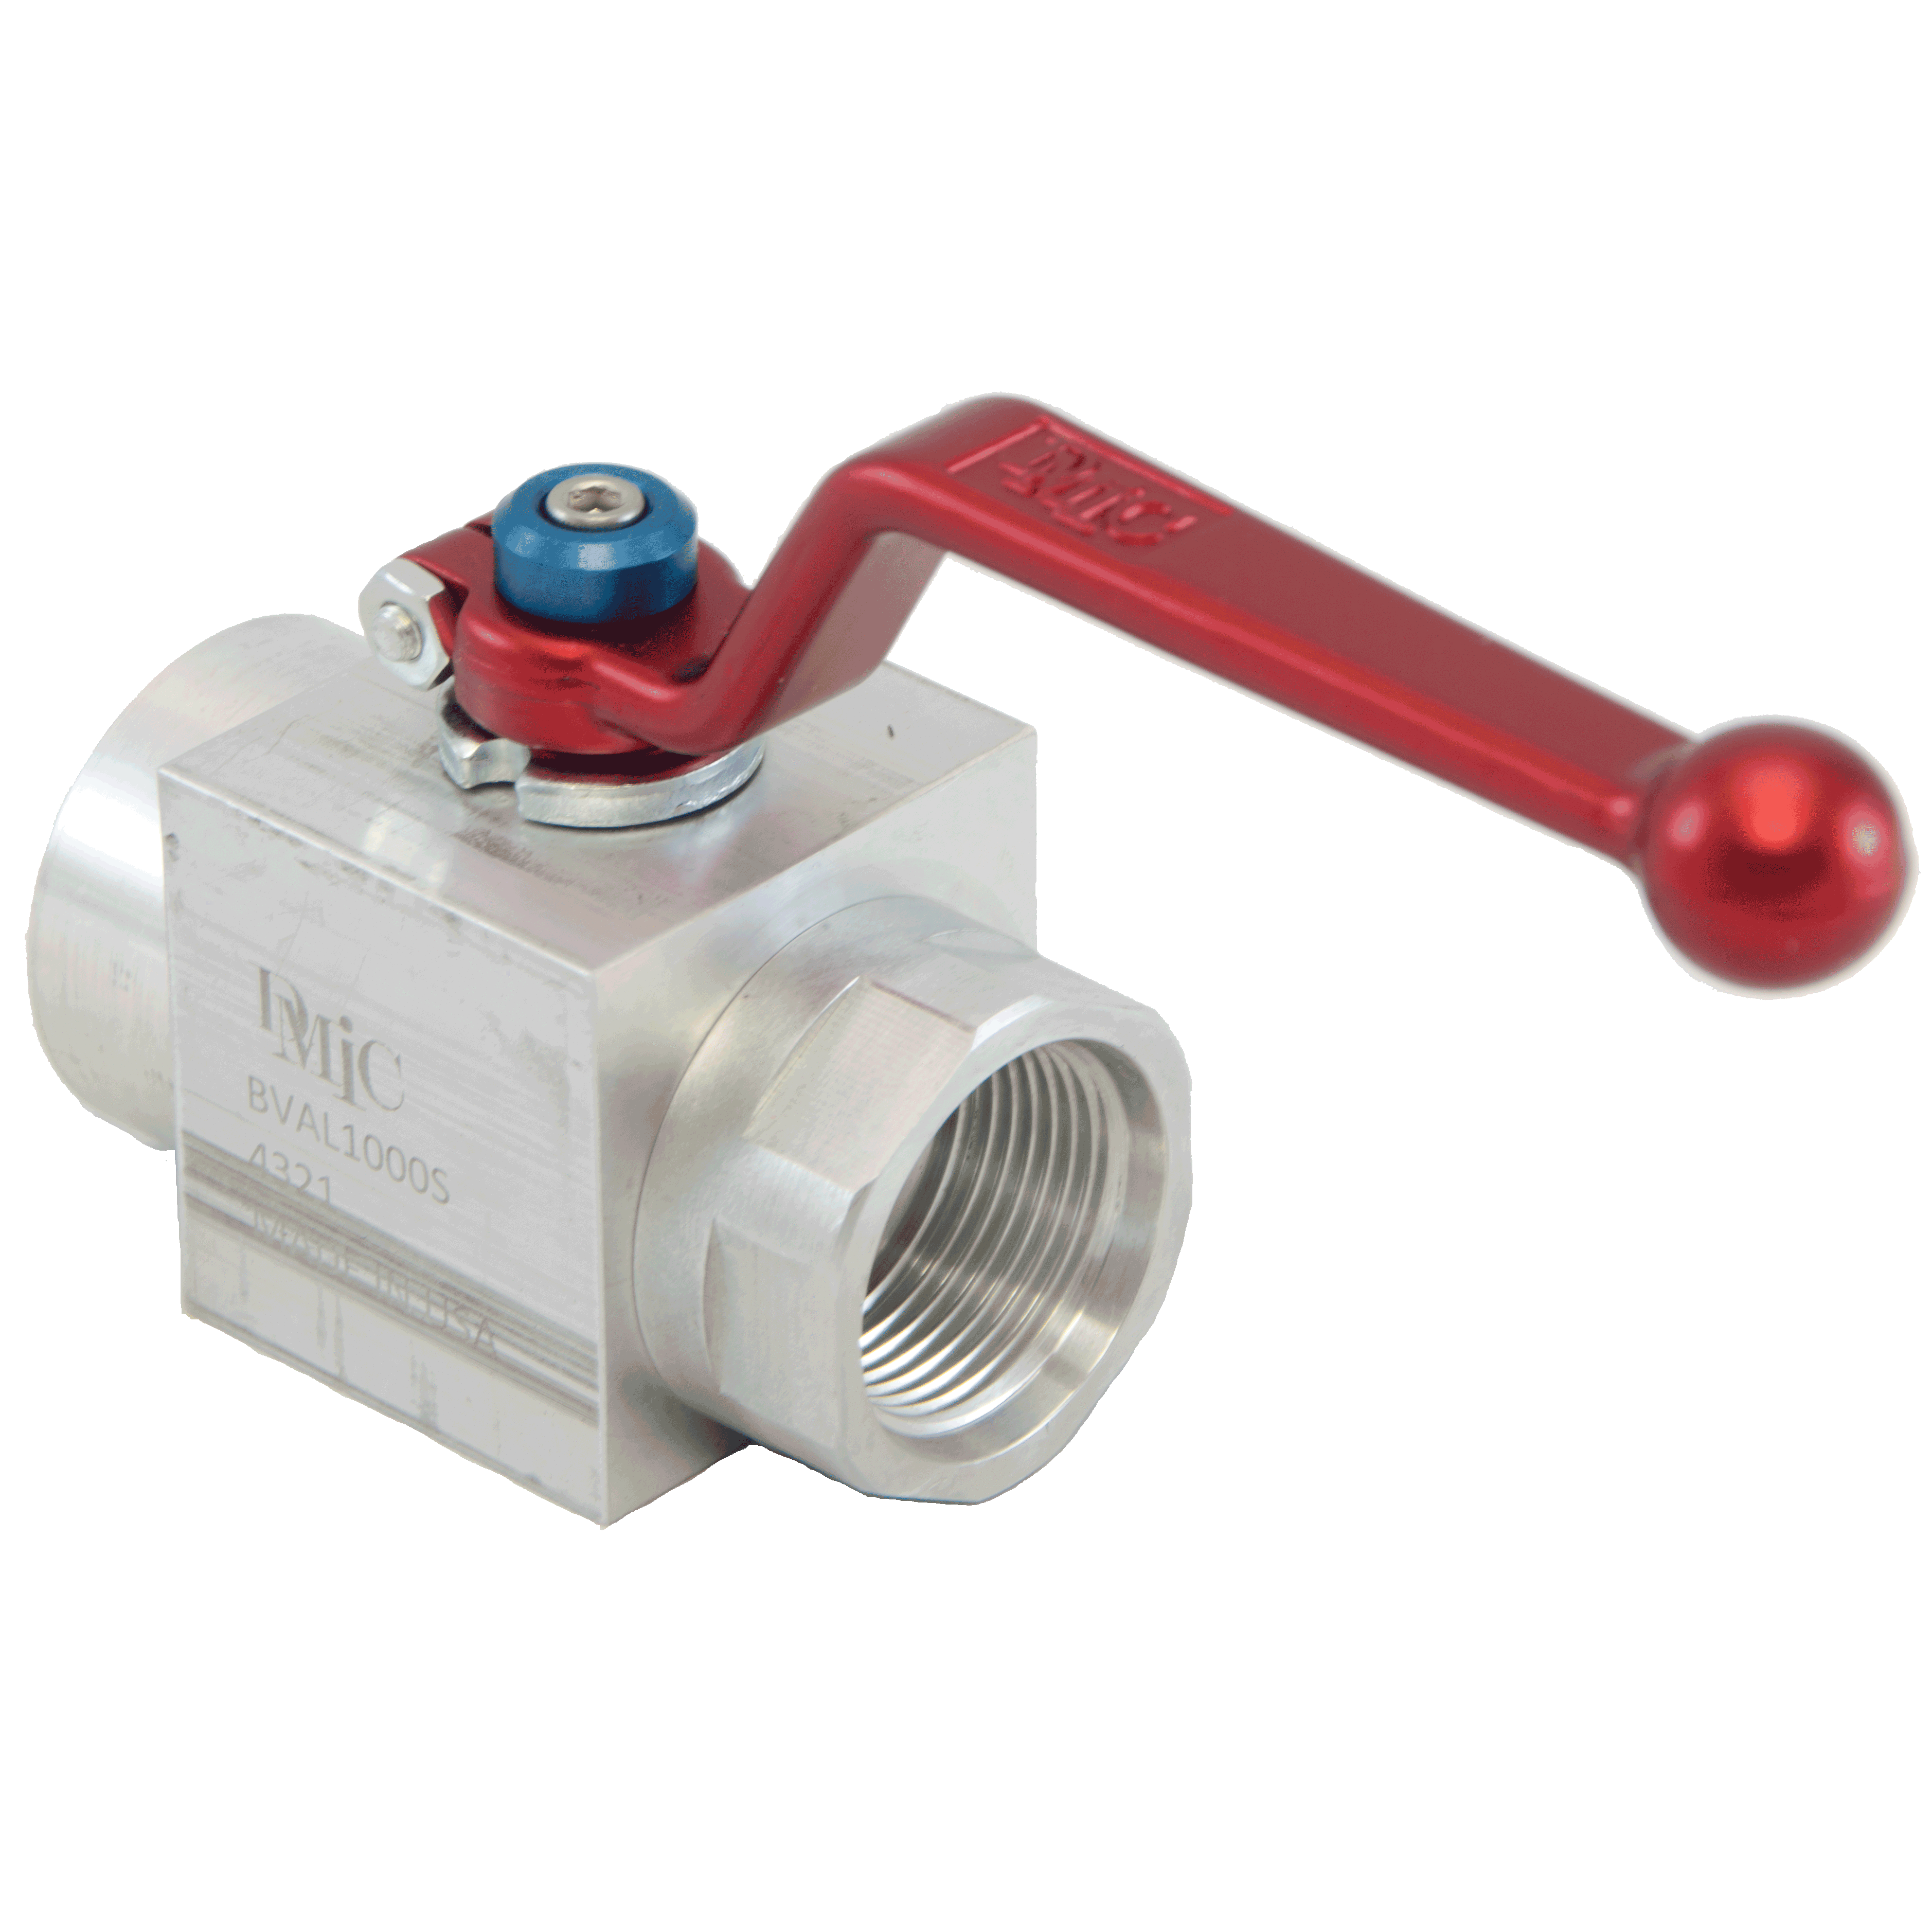 BVAL-2000S-4321 : DMIC Suction Ball Valve, #32 SAE (3/4), Aluminum, 600psi, Two-Way